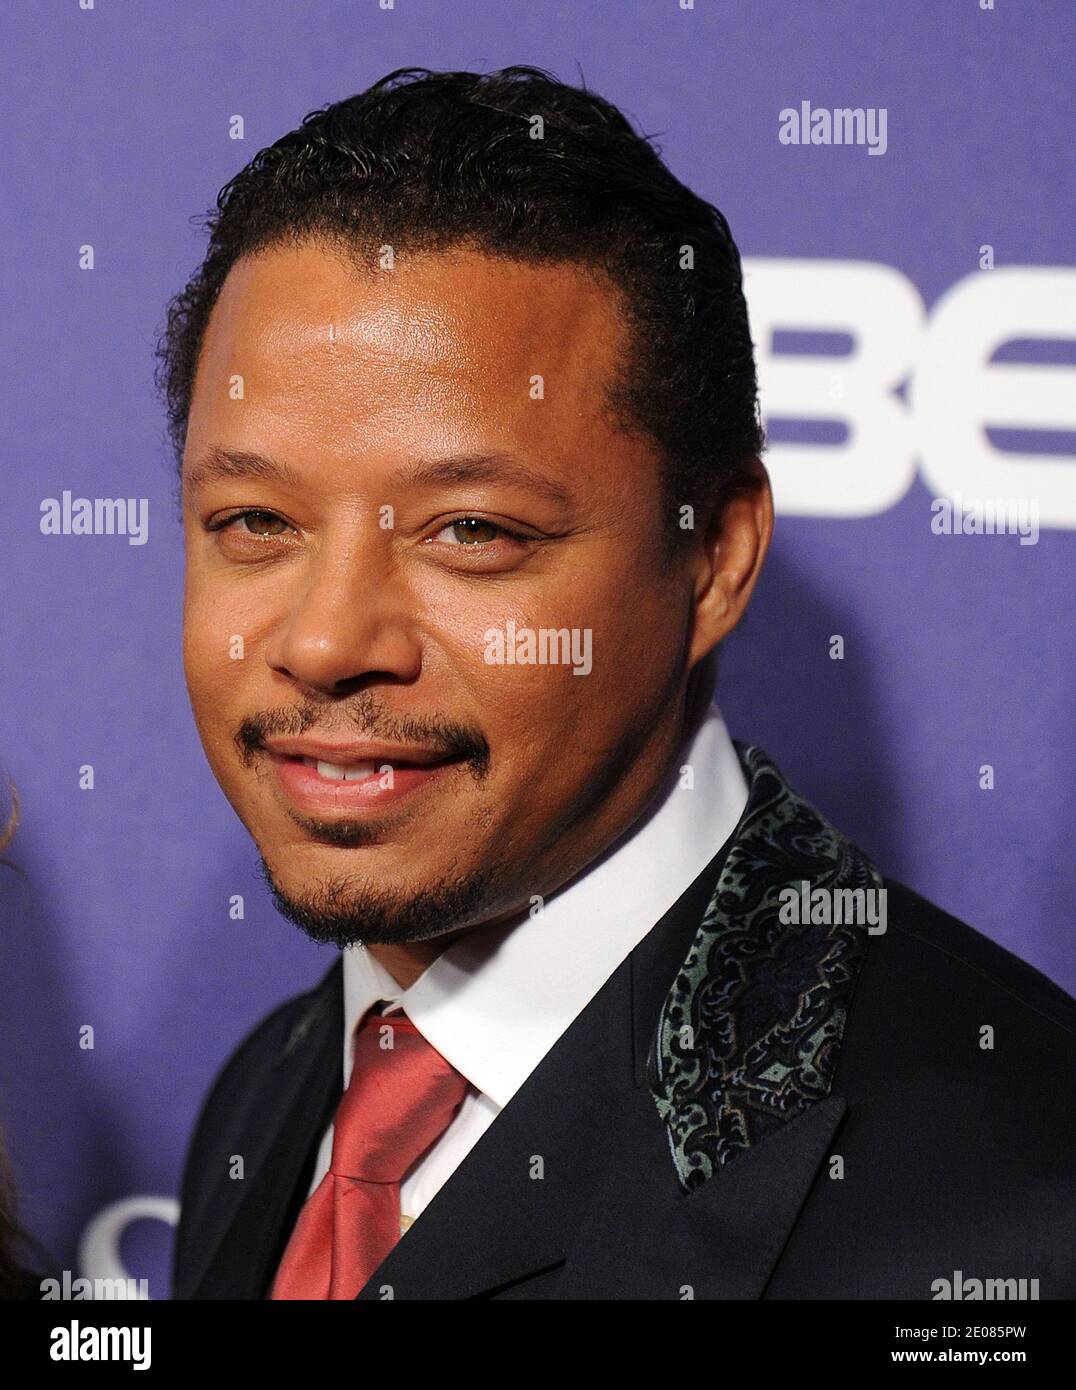 Terrence Howard attends the BET honors red carpet in Washington, DC, USA, on January 14, 2012. Photo by Olivier Douliery/ABACAPRESS.COM Stock Photo